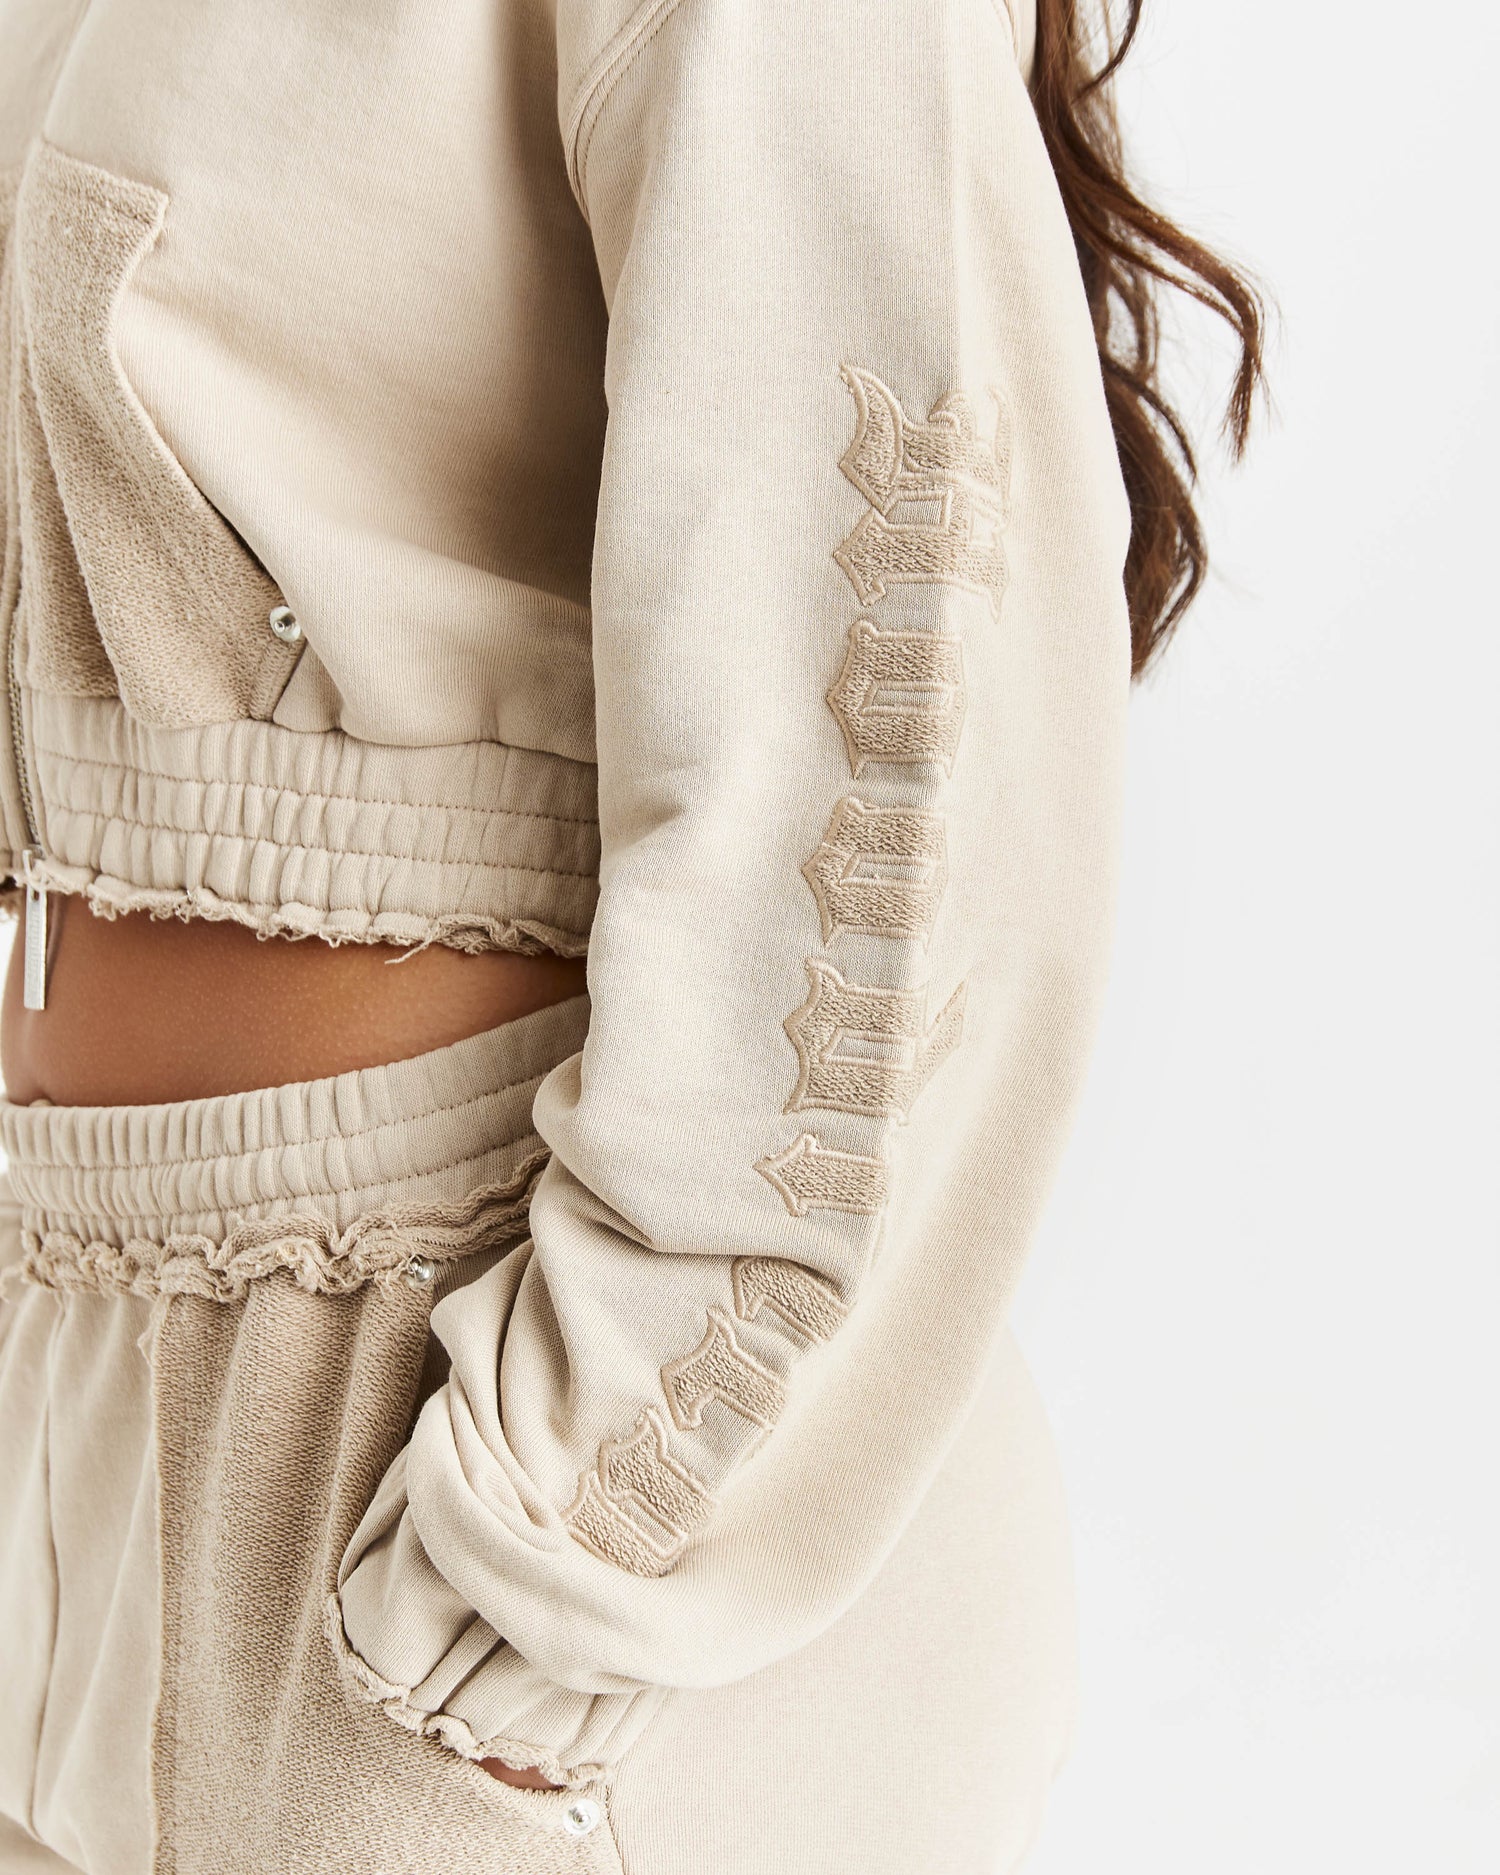 Collision Relaxed Cropped Zip Hoodie - Beige